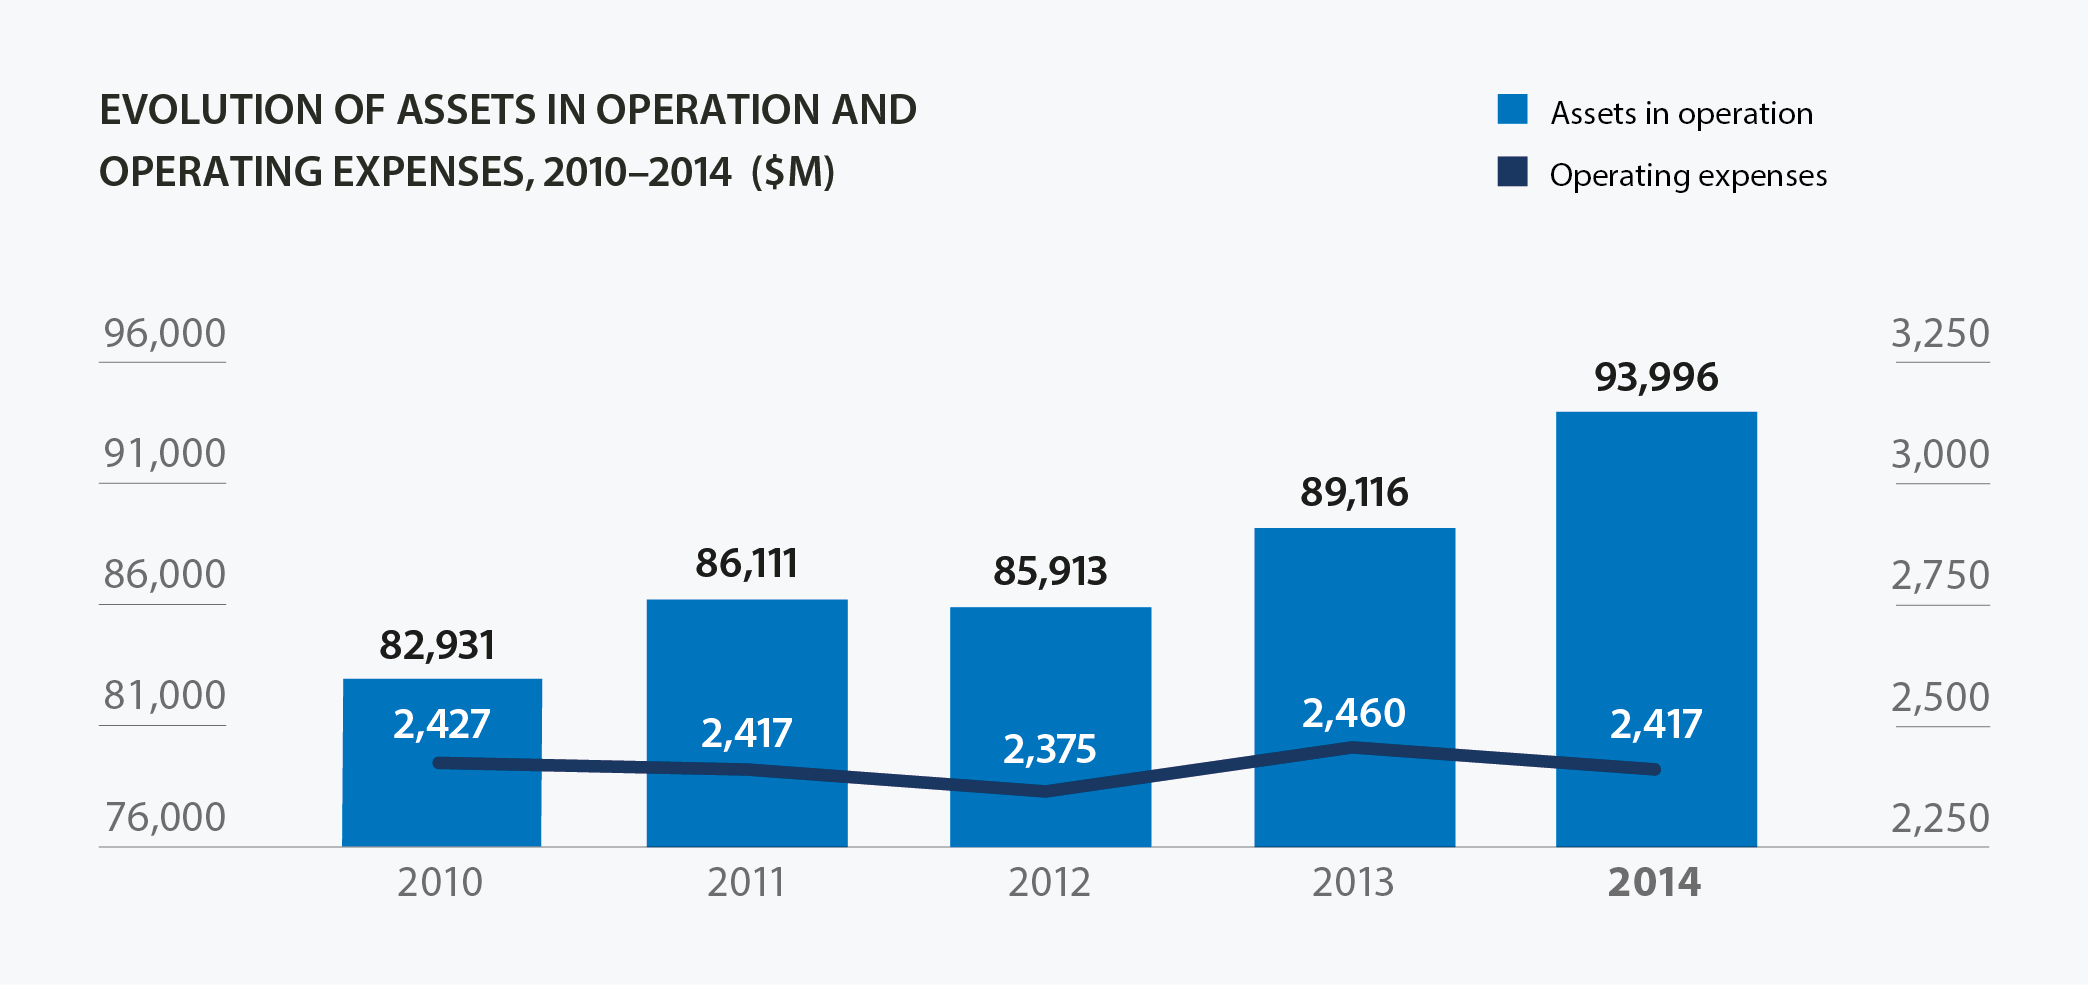 Evolution of assets in operation and operating expenses, 2010-2014 ($M)